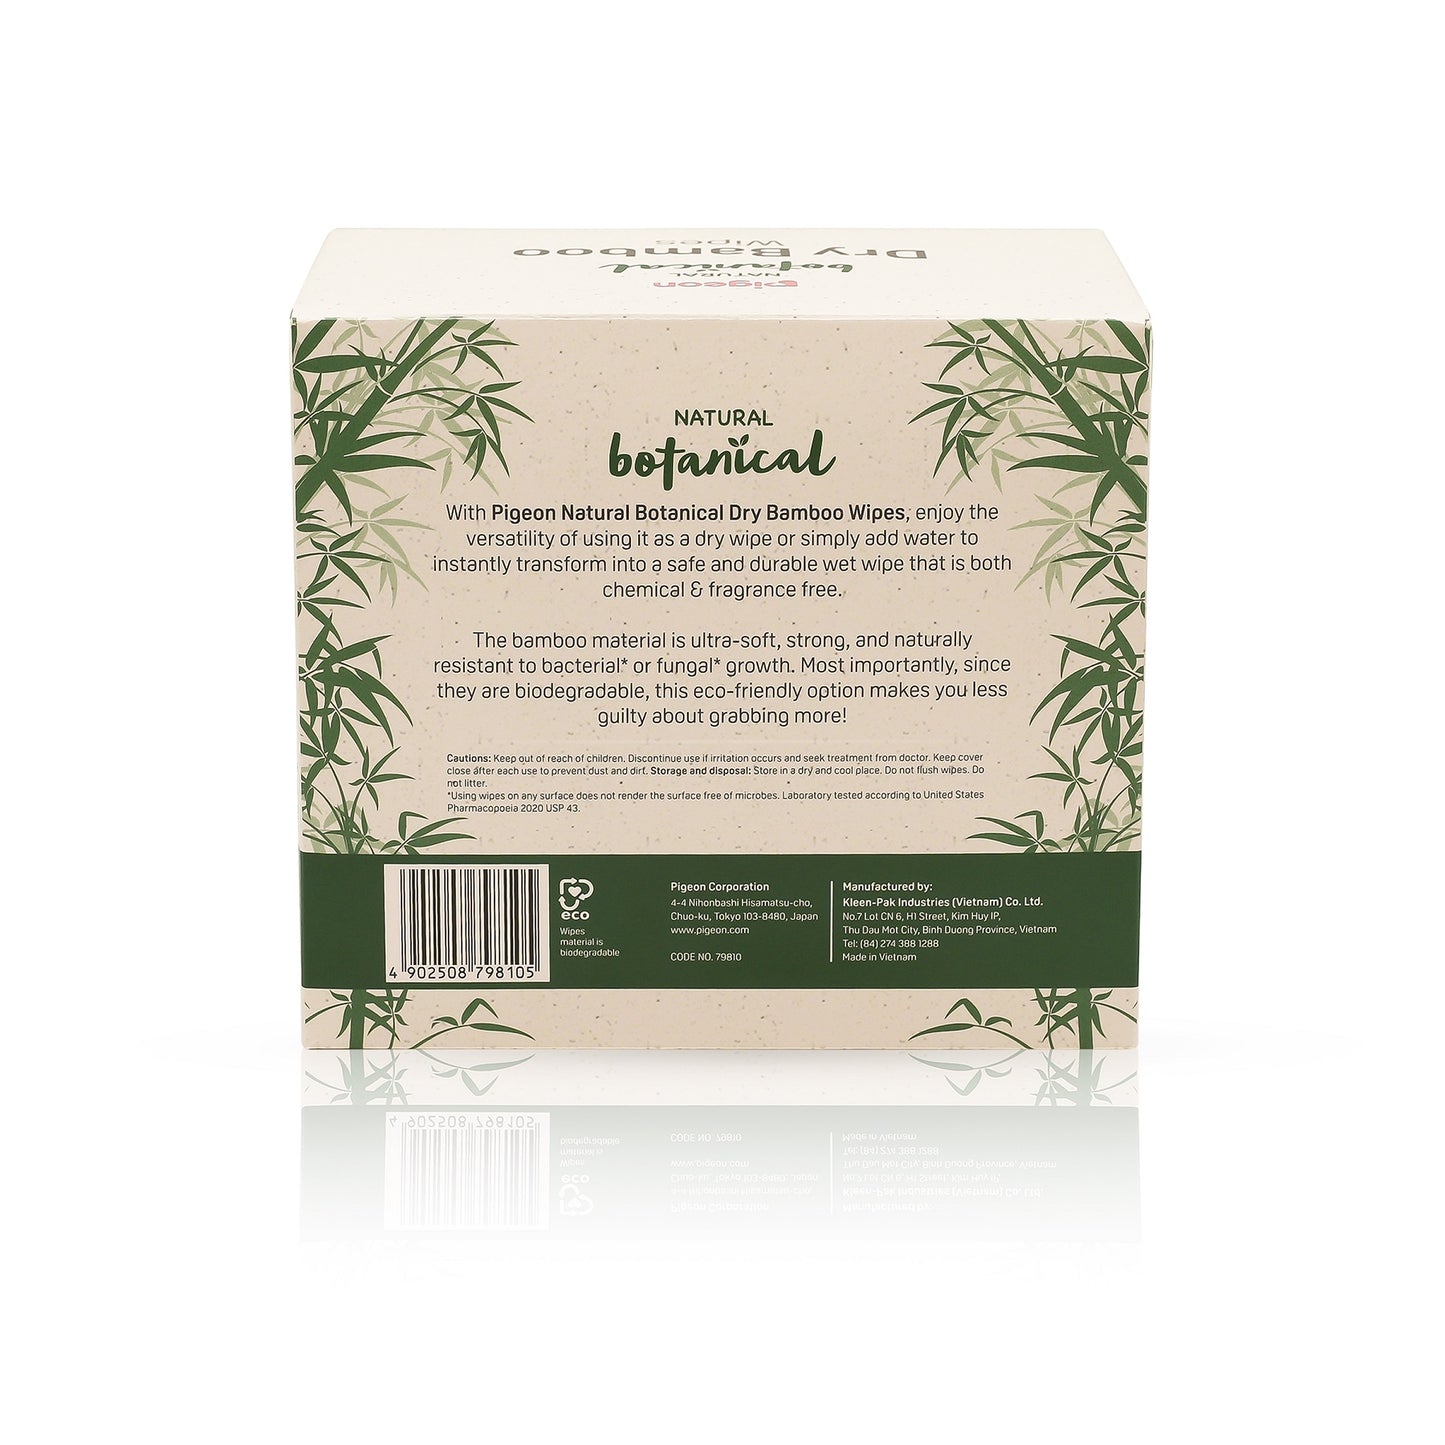 Pigeon Natural Botanical Dry Bamboo Wipes 70 Wipes